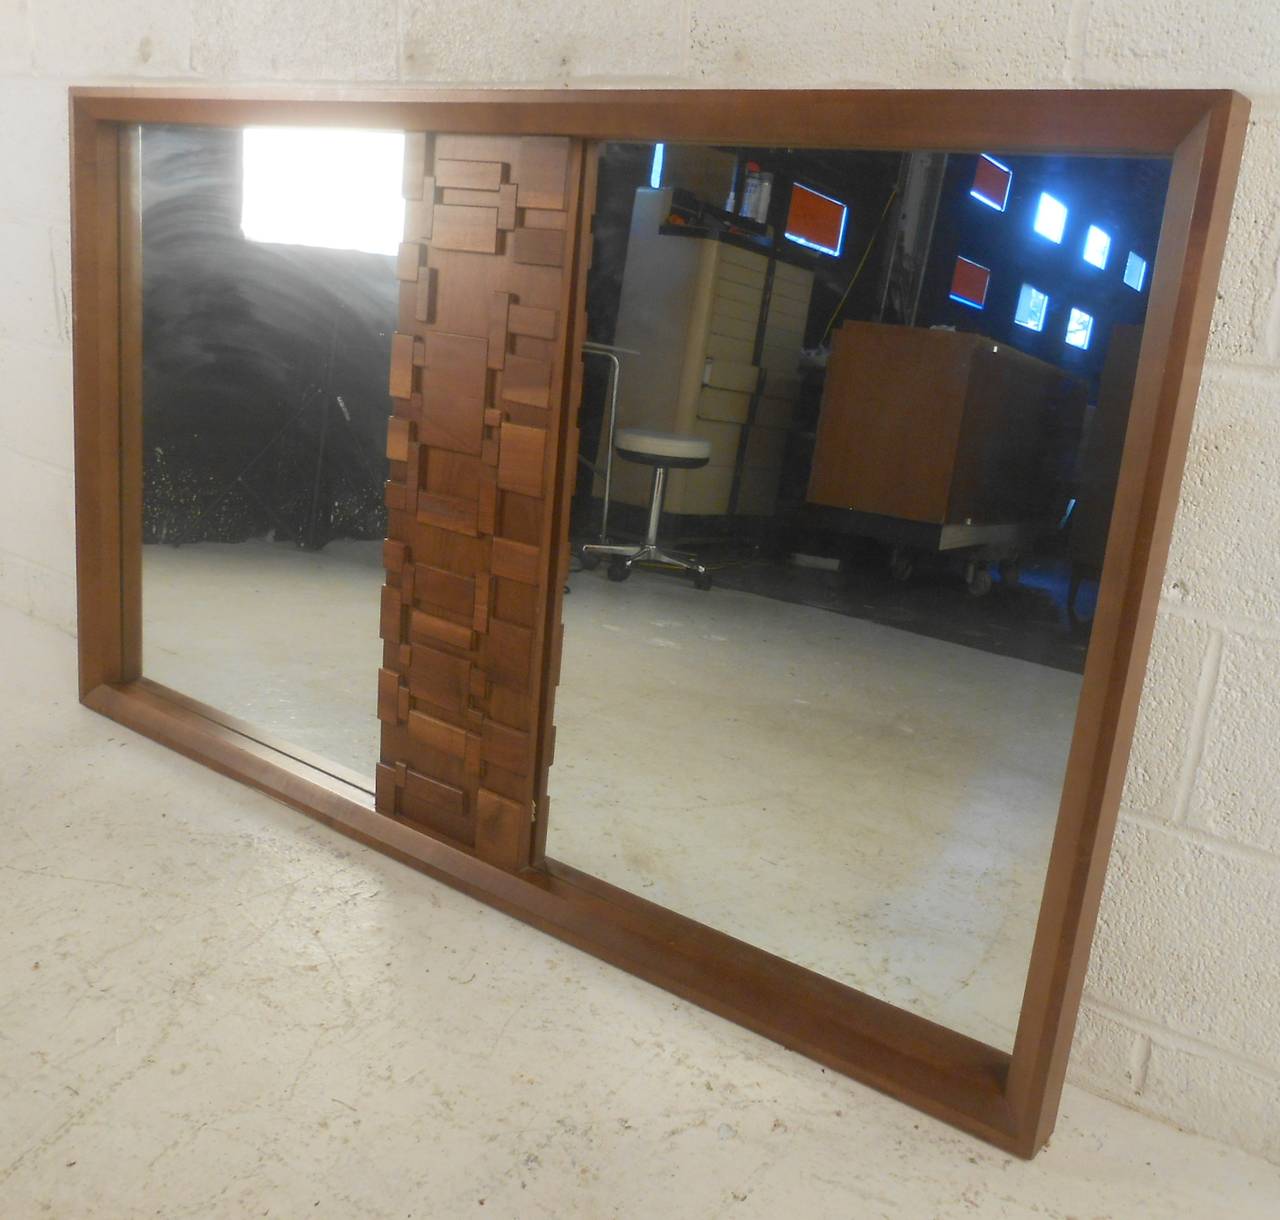 Striking brutalist mirror with unique mid-century modern design and sculptural wood design. Can be used as a dressing mirror or adapted to hang on a wall. (Please confirm item location - NY or NJ - with dealer)